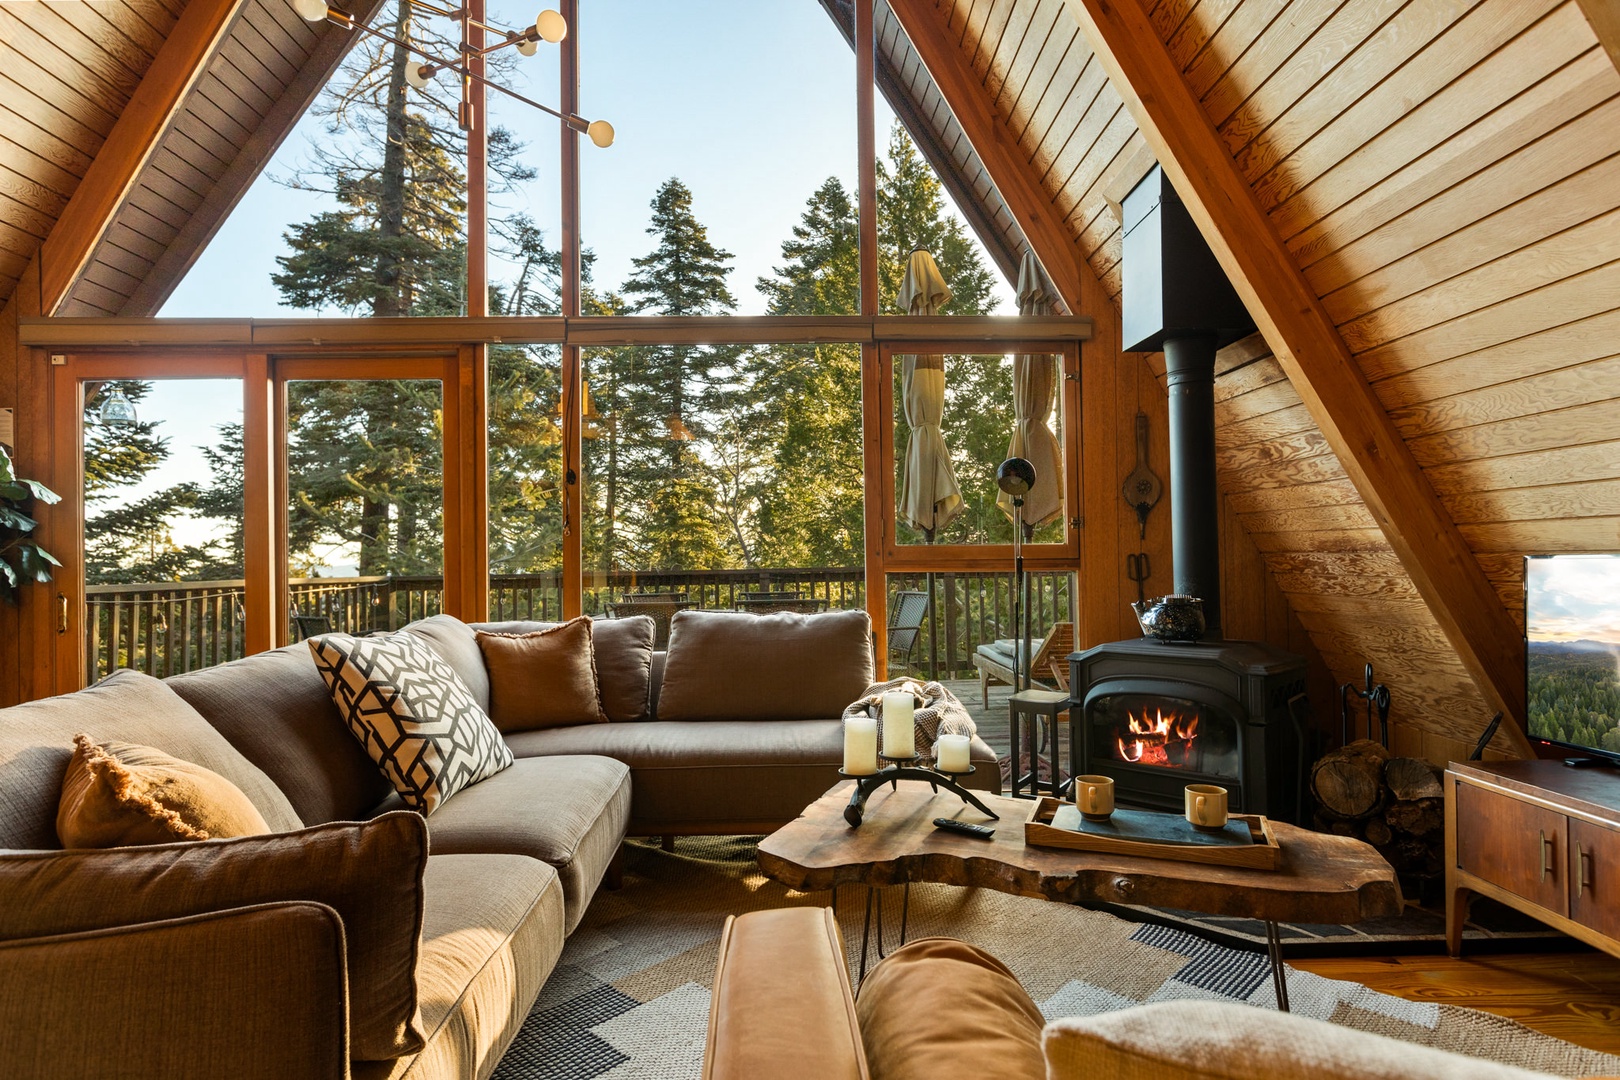 The Tranquil Pines A-Frame Cabin